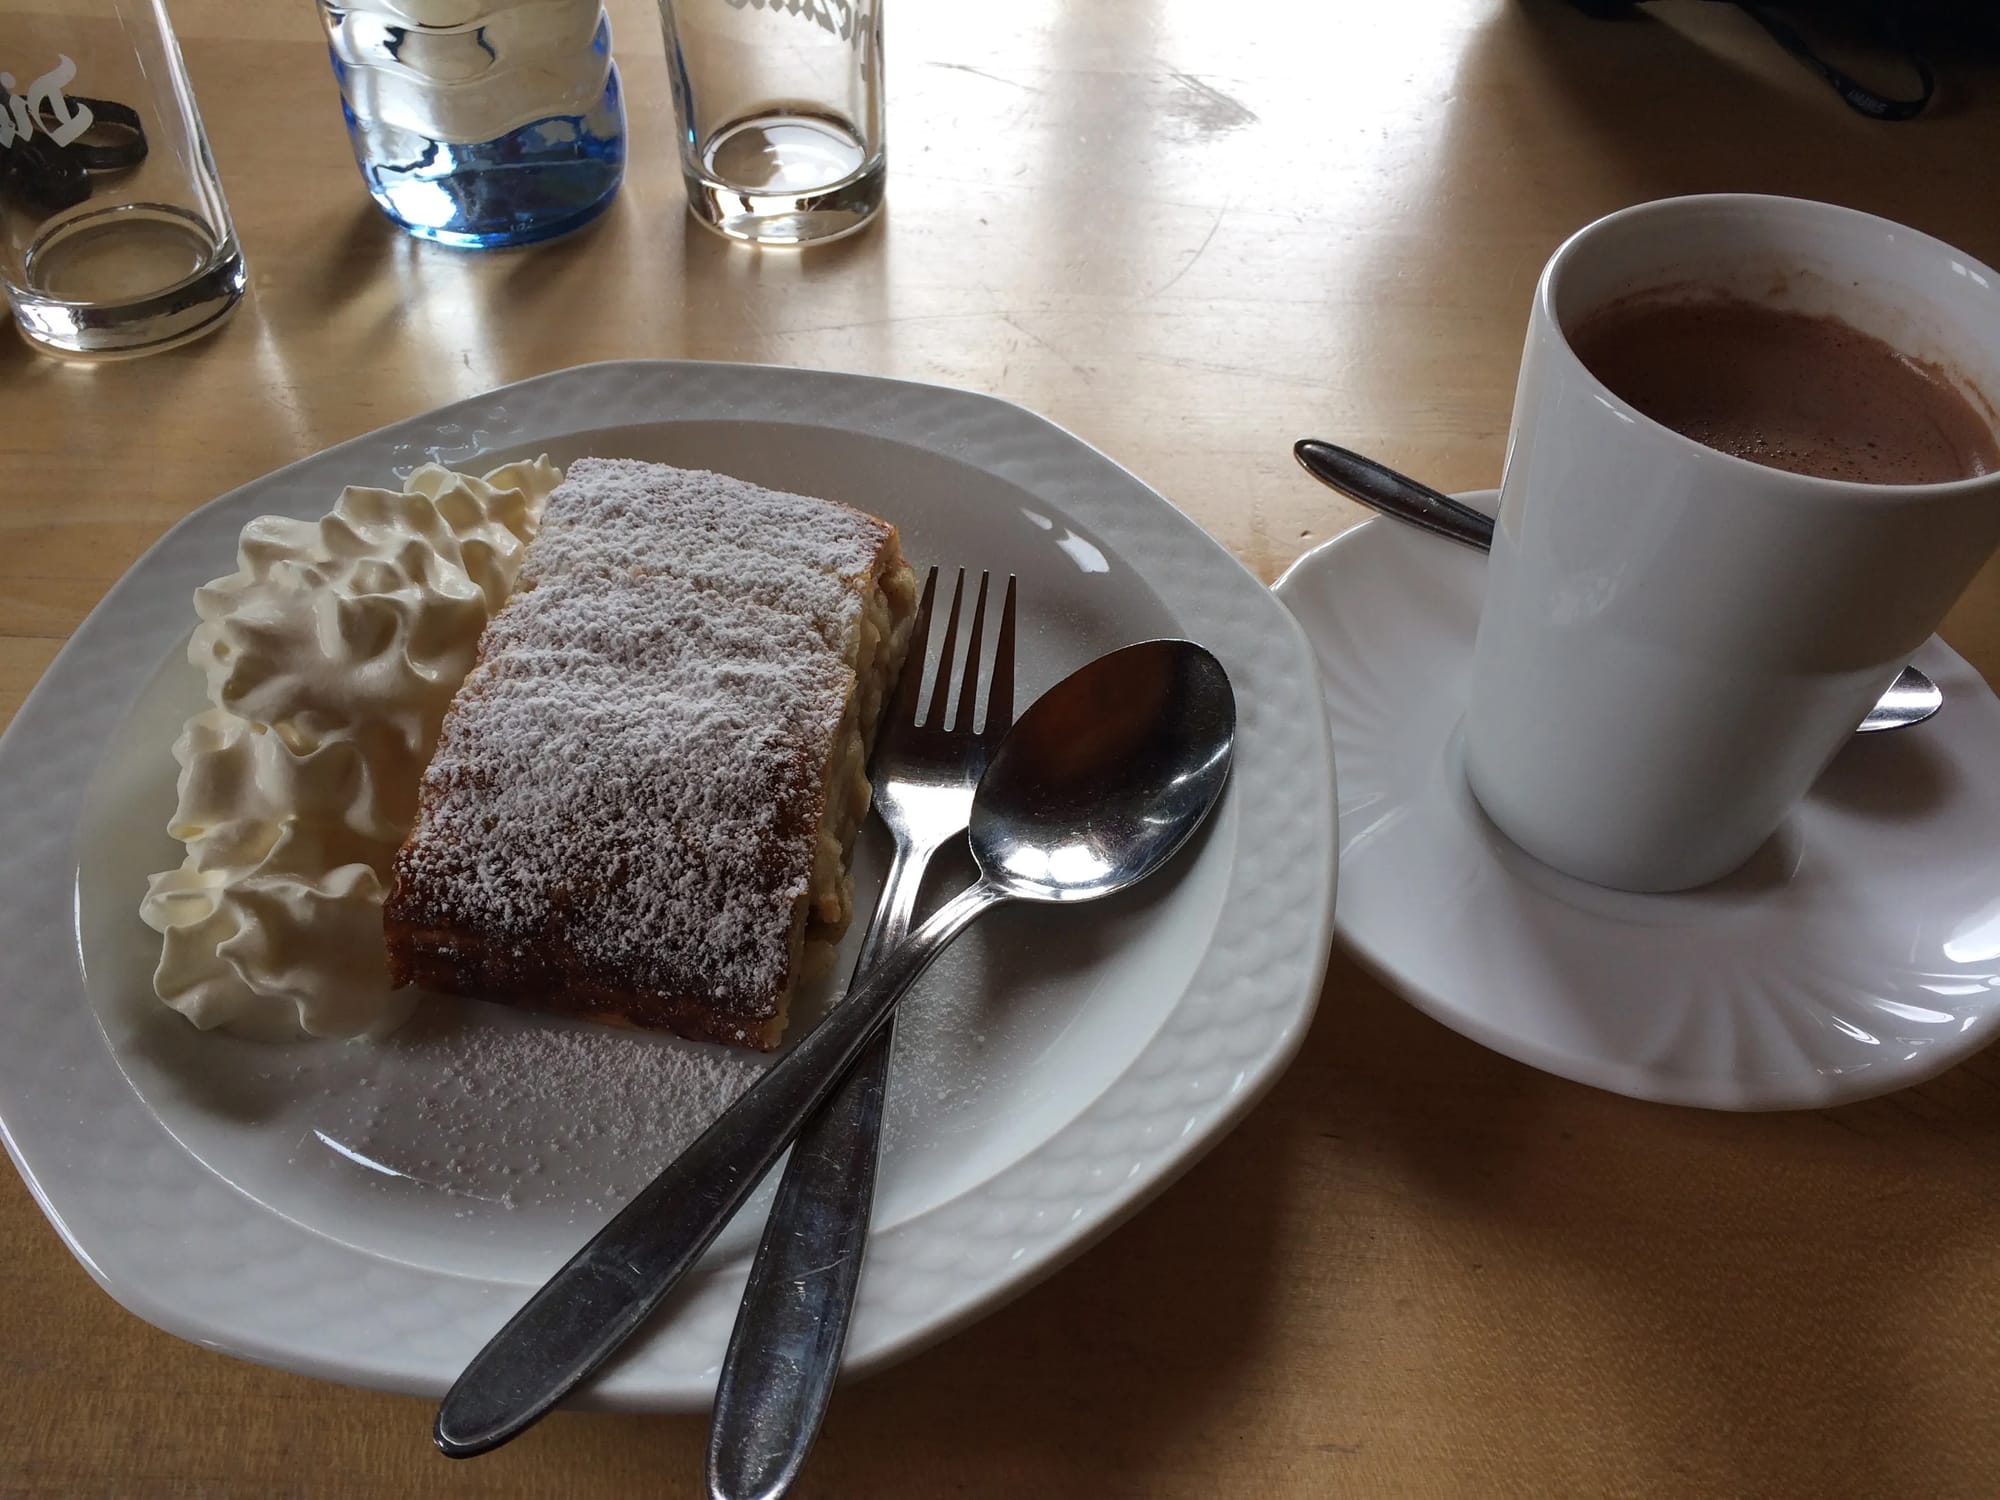 Photo by Author — Apple Strudel and Hot Chocolate at the Kapall restaurant